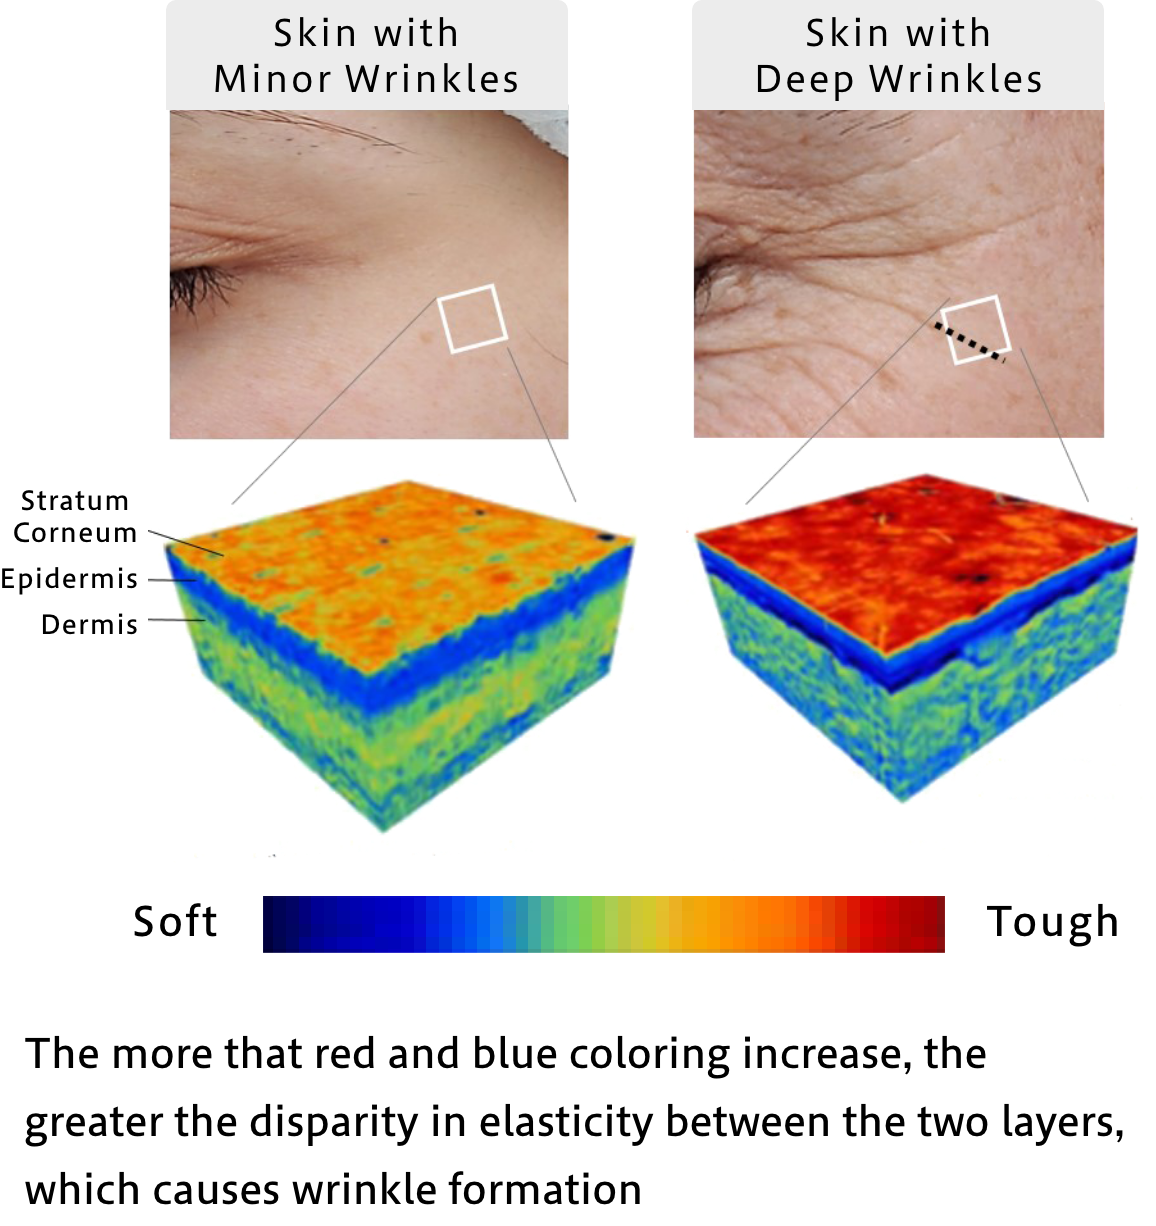 Shiseido’s world-first technology has enabled discovery of the “root causes behind wrinkles.” When the skin’s stratum corneum layer becomes too hard, it puts a burden on the dermal layer below, leading to wrinkle formation.